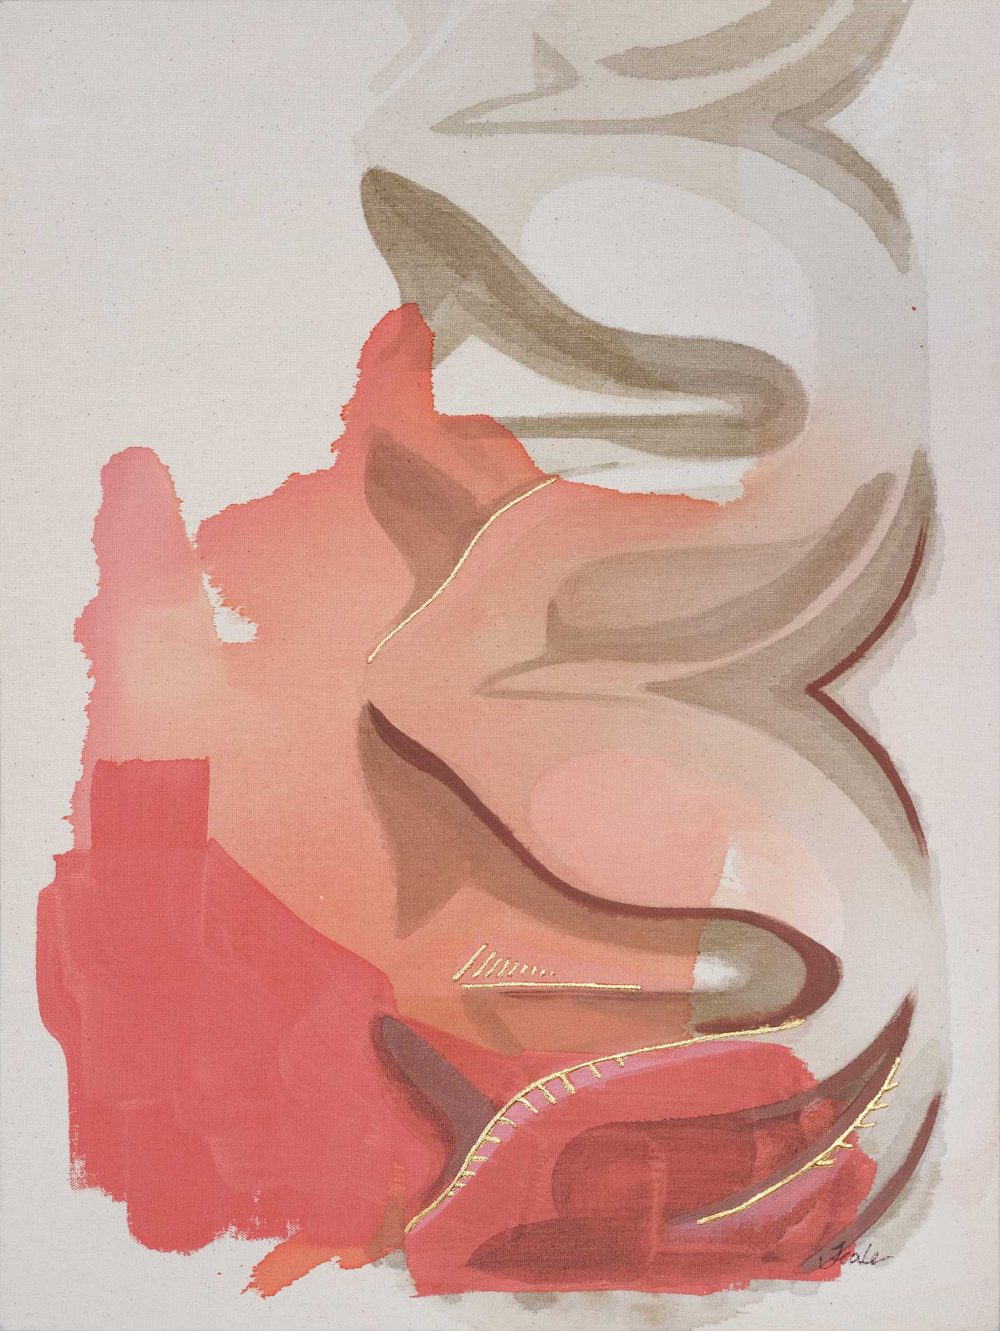 "Meander" is a coral, peach, sepia, and cream colored painting of a classical architectural detail by Teale Hatheway